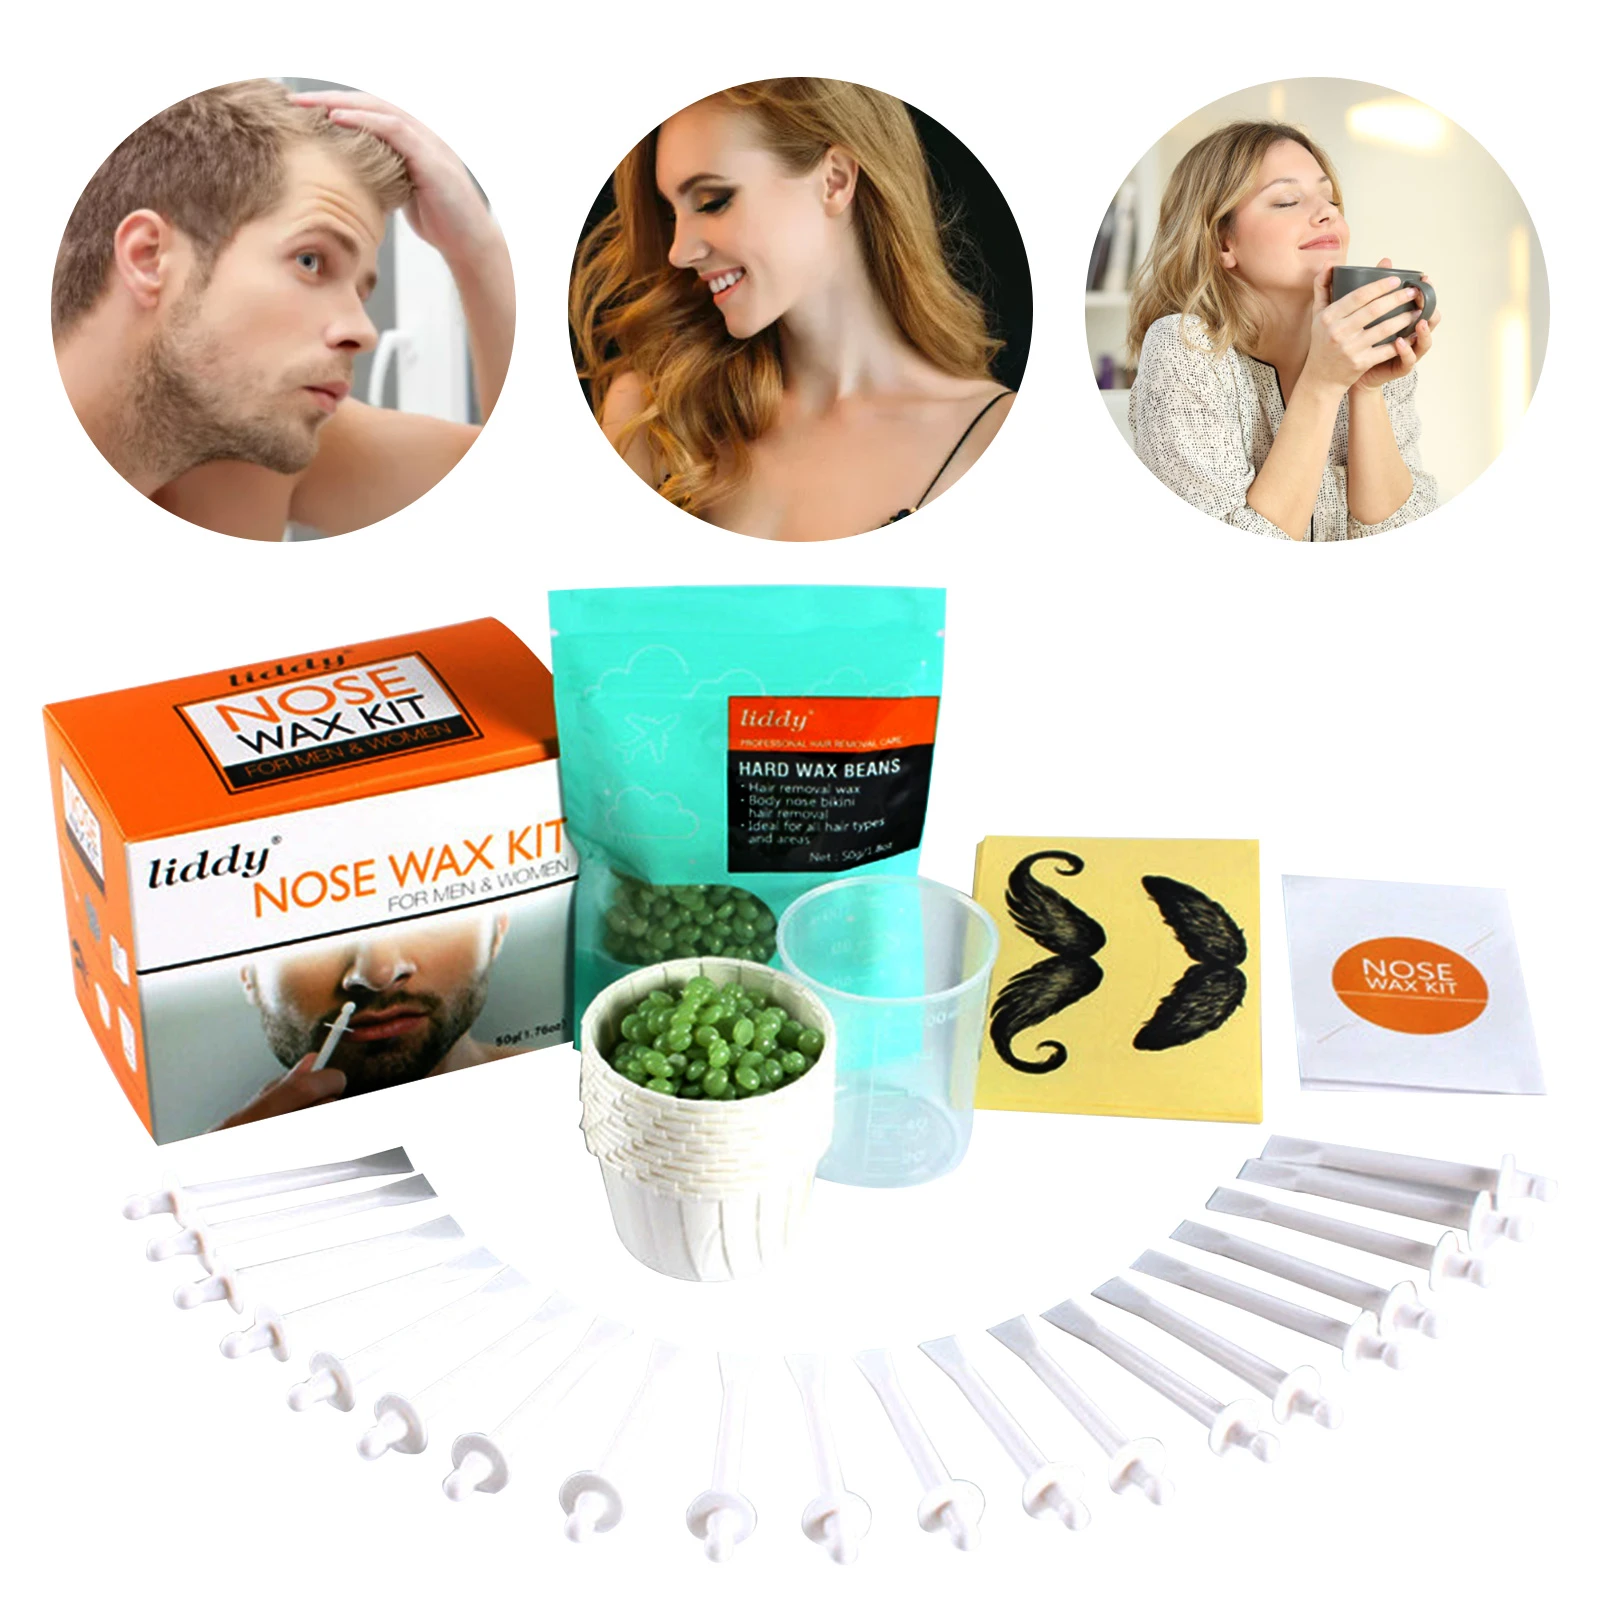 Wax Beanportable Painless Nose Wax Kit For Men & Women Nose Hair Removal Wax  Set Paper-free Nose Hair Wax Beans Cleaning Wax Kit - Nose & Ear Trimmer -  AliExpress